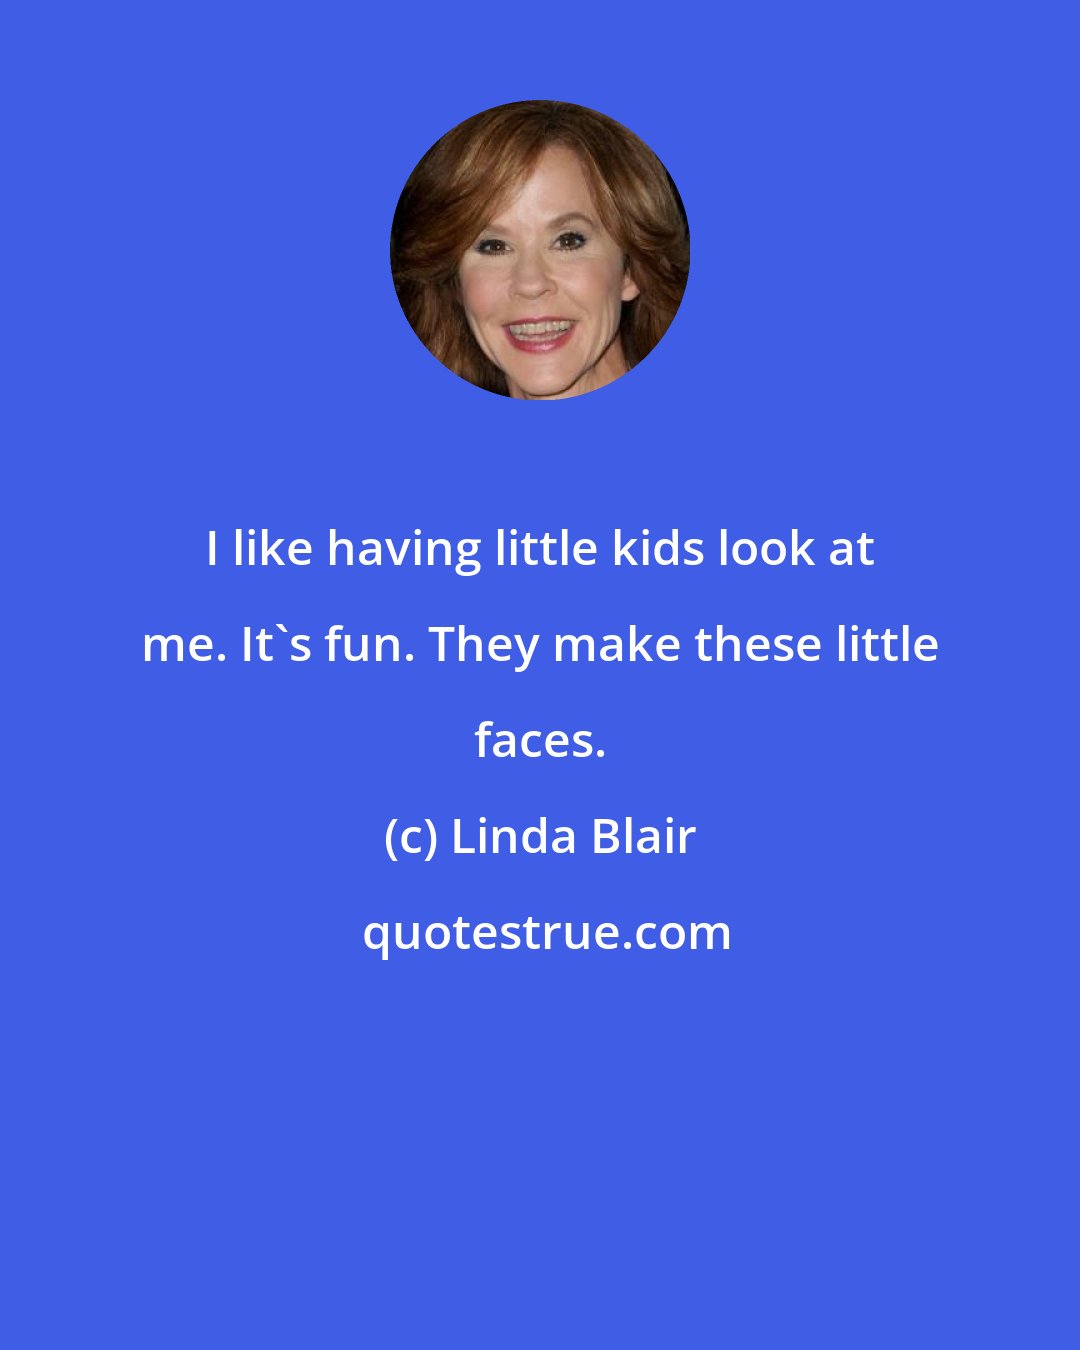 Linda Blair: I like having little kids look at me. It's fun. They make these little faces.